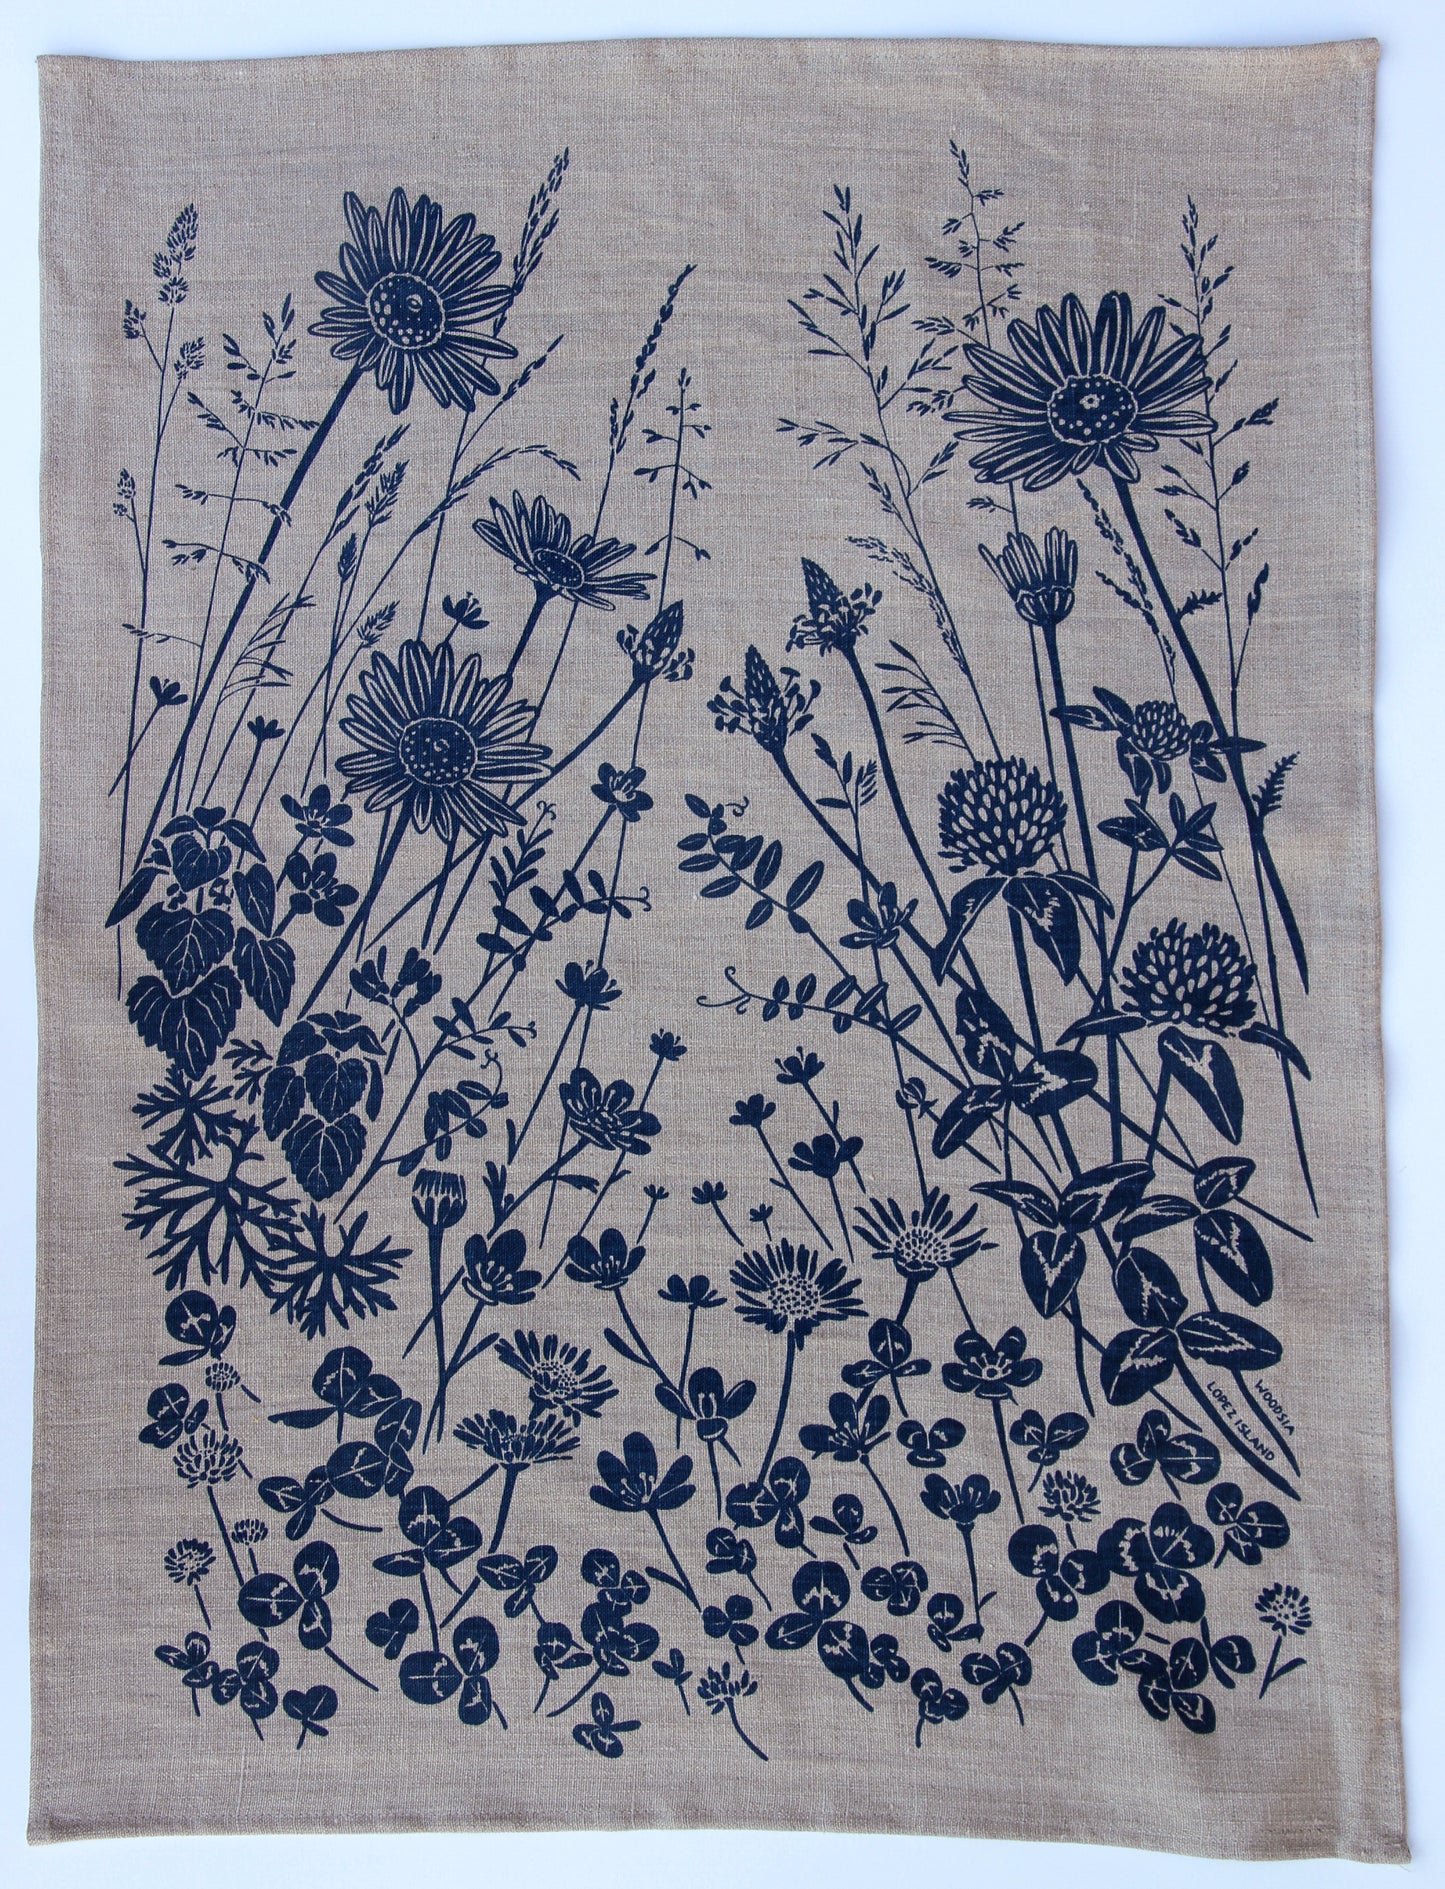 Springtime Wildflowers in Dusty Blue on Natural Linen